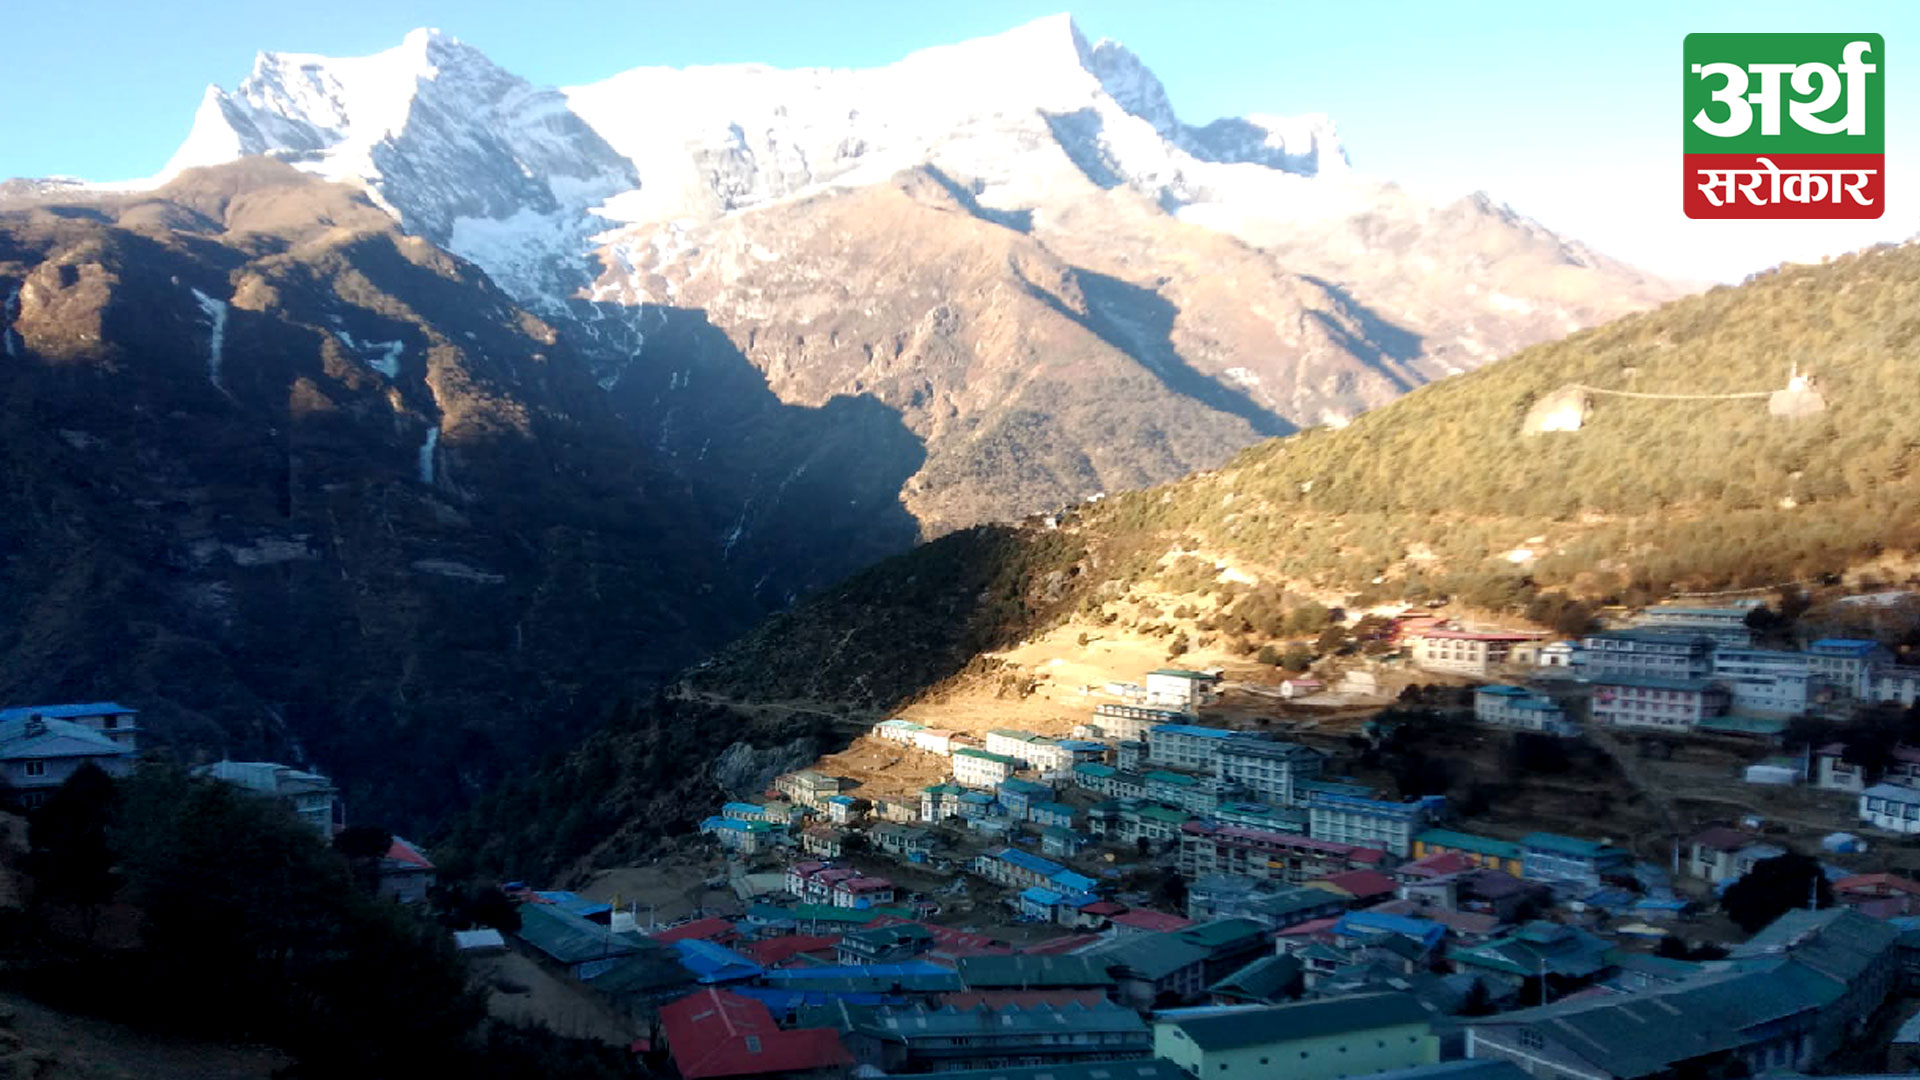 Tourists’ arrivals fall by 30 percent in the Sagarmatha region